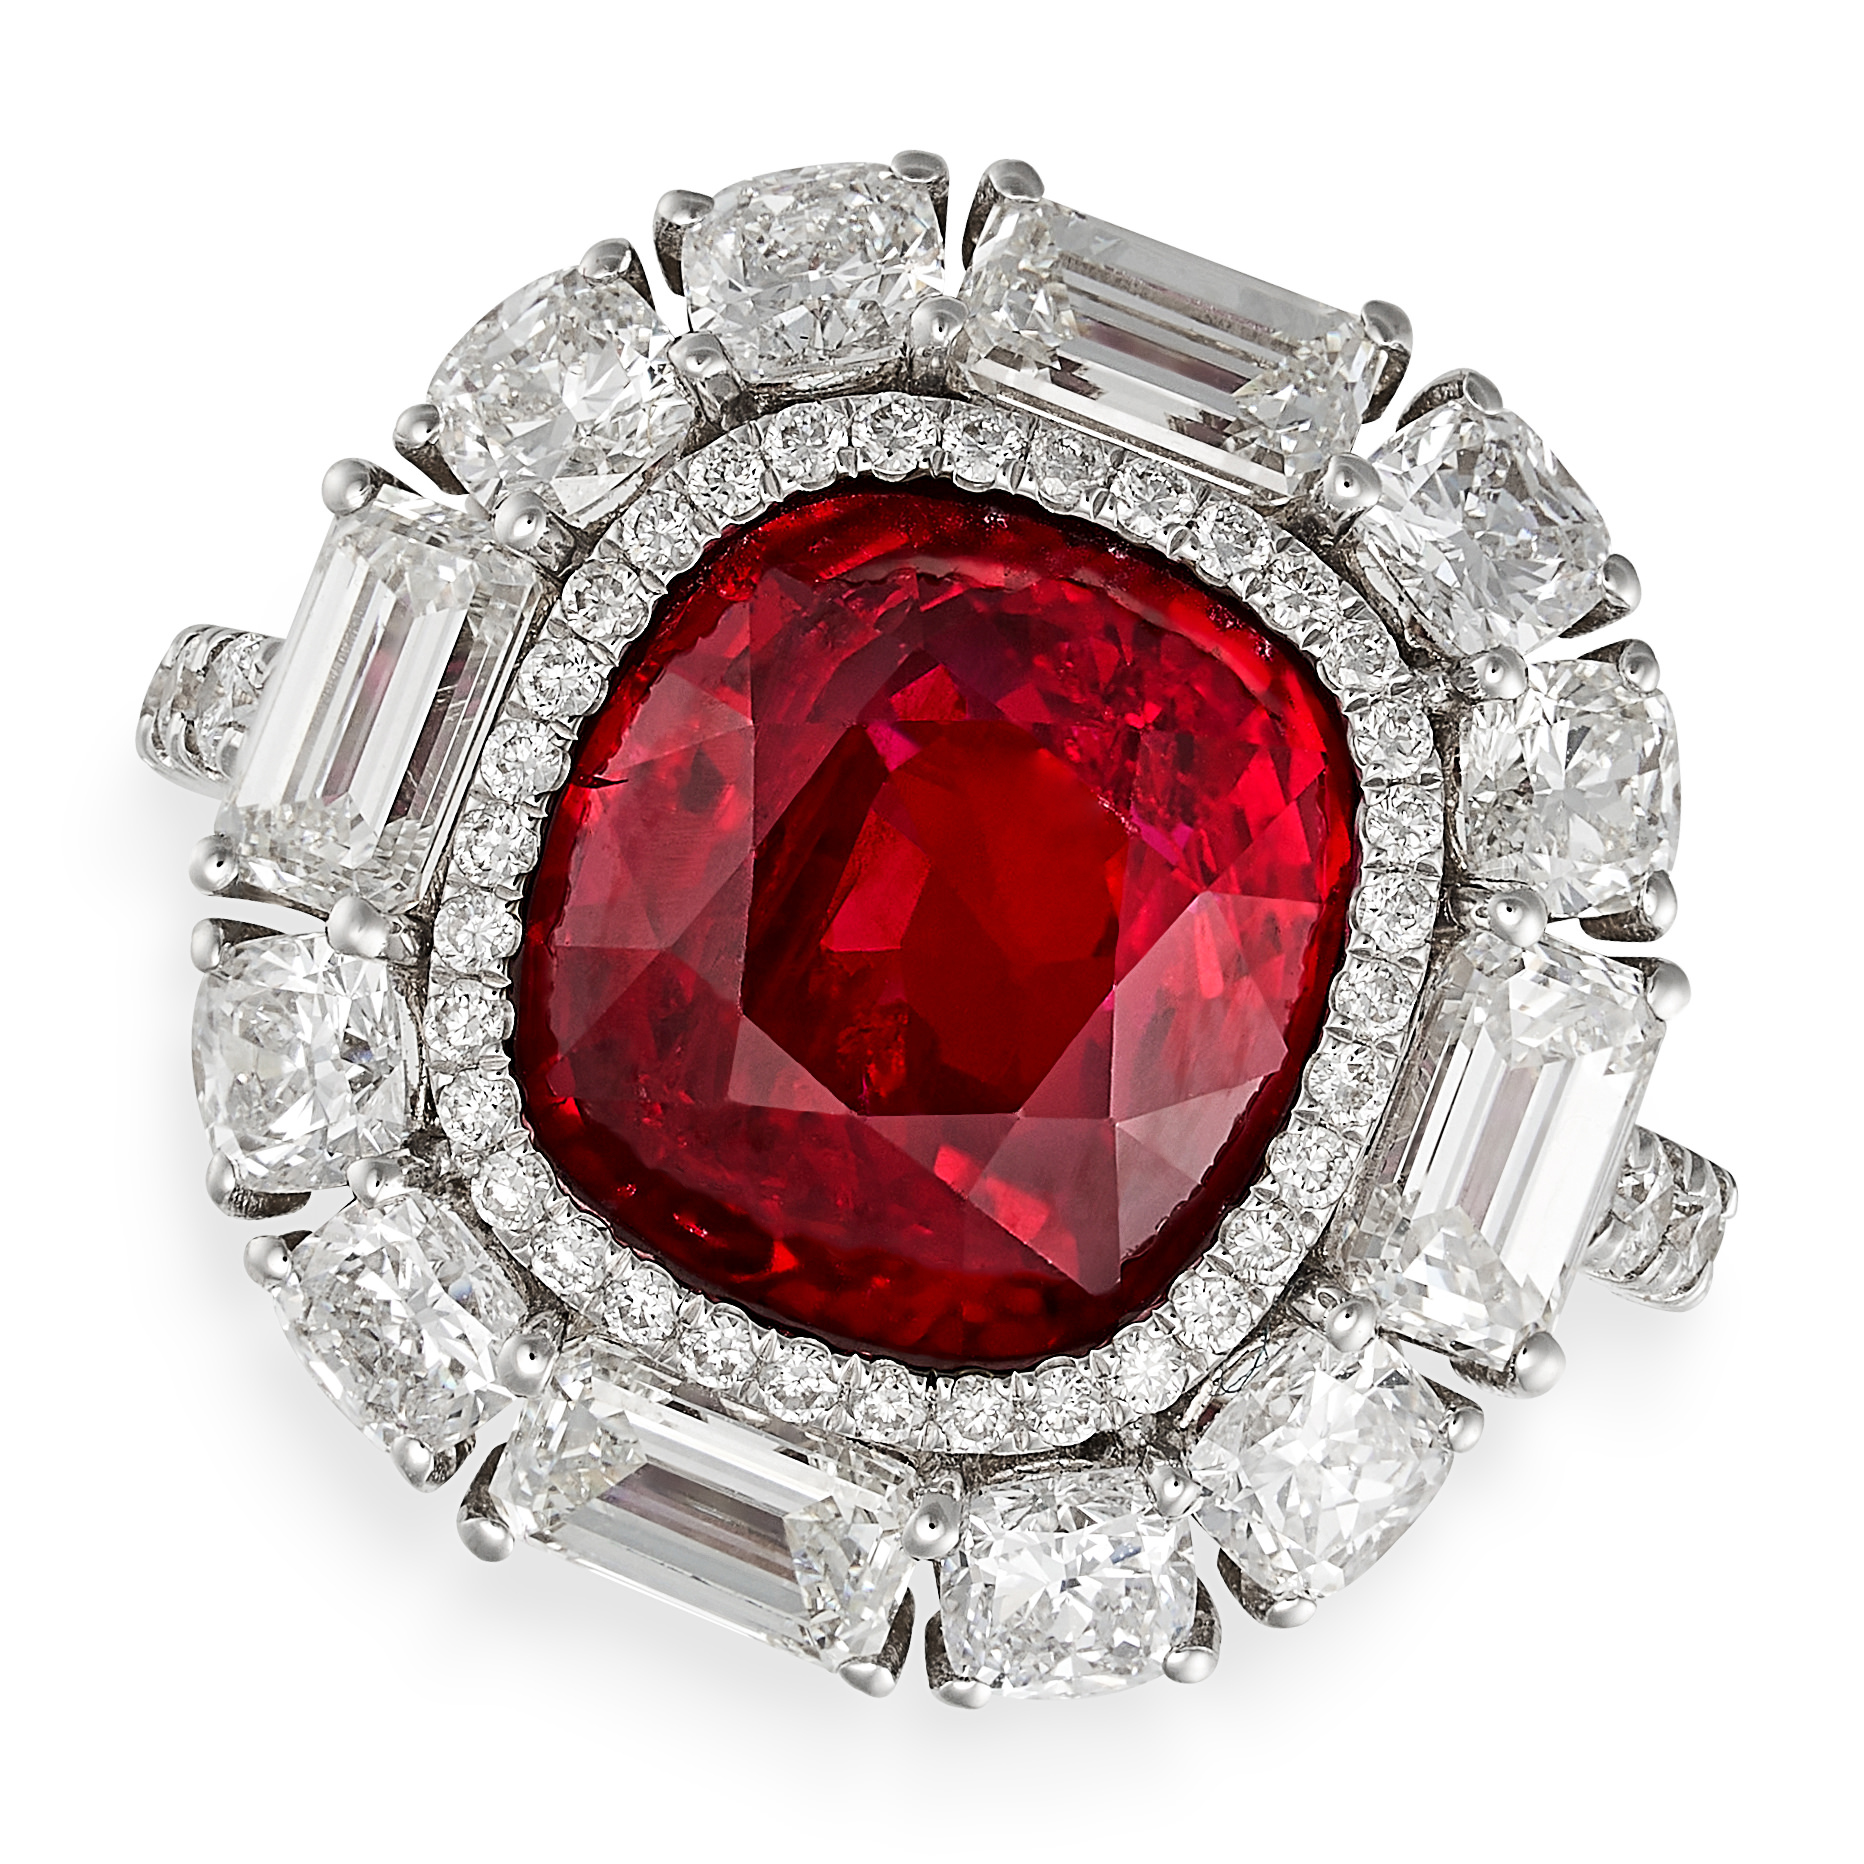 AN IMPORTANT PIGEON'S BLOOD BURMA NO HEAT RUBY AND DIAMOND RING in white gold, set with a cushion